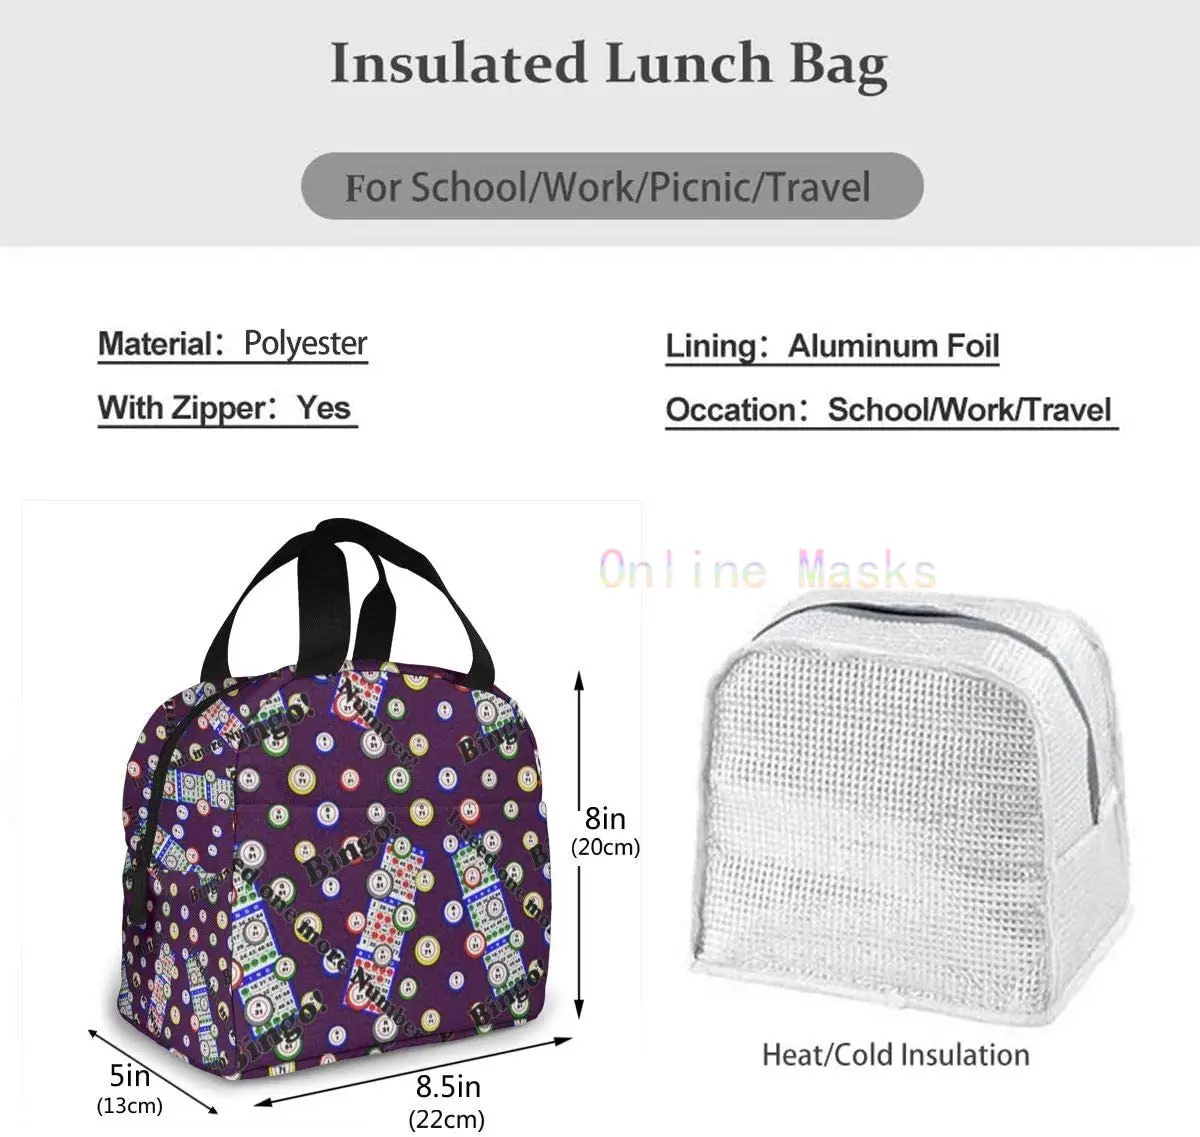 Bingo I Need One More Numbe Lunch Bag Cooler Bag Women Tote Bag Insulated Lunch Box Soft Liner Lunch Container for Picnic Travel images - 6